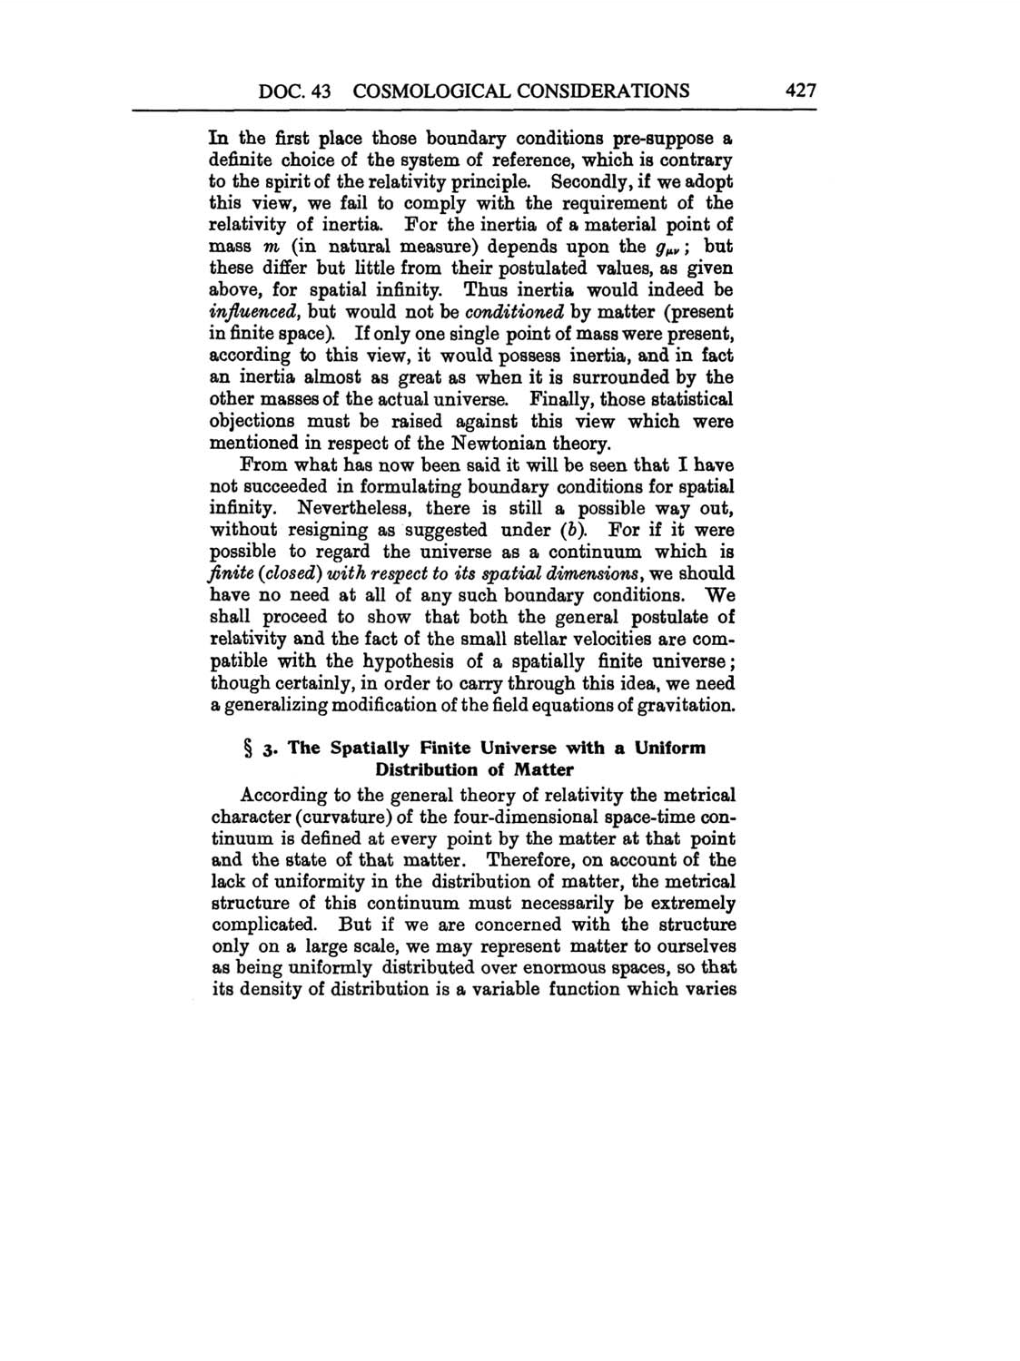 Volume 6: The Berlin Years: Writings, 1914-1917 (English translation supplement) page 427